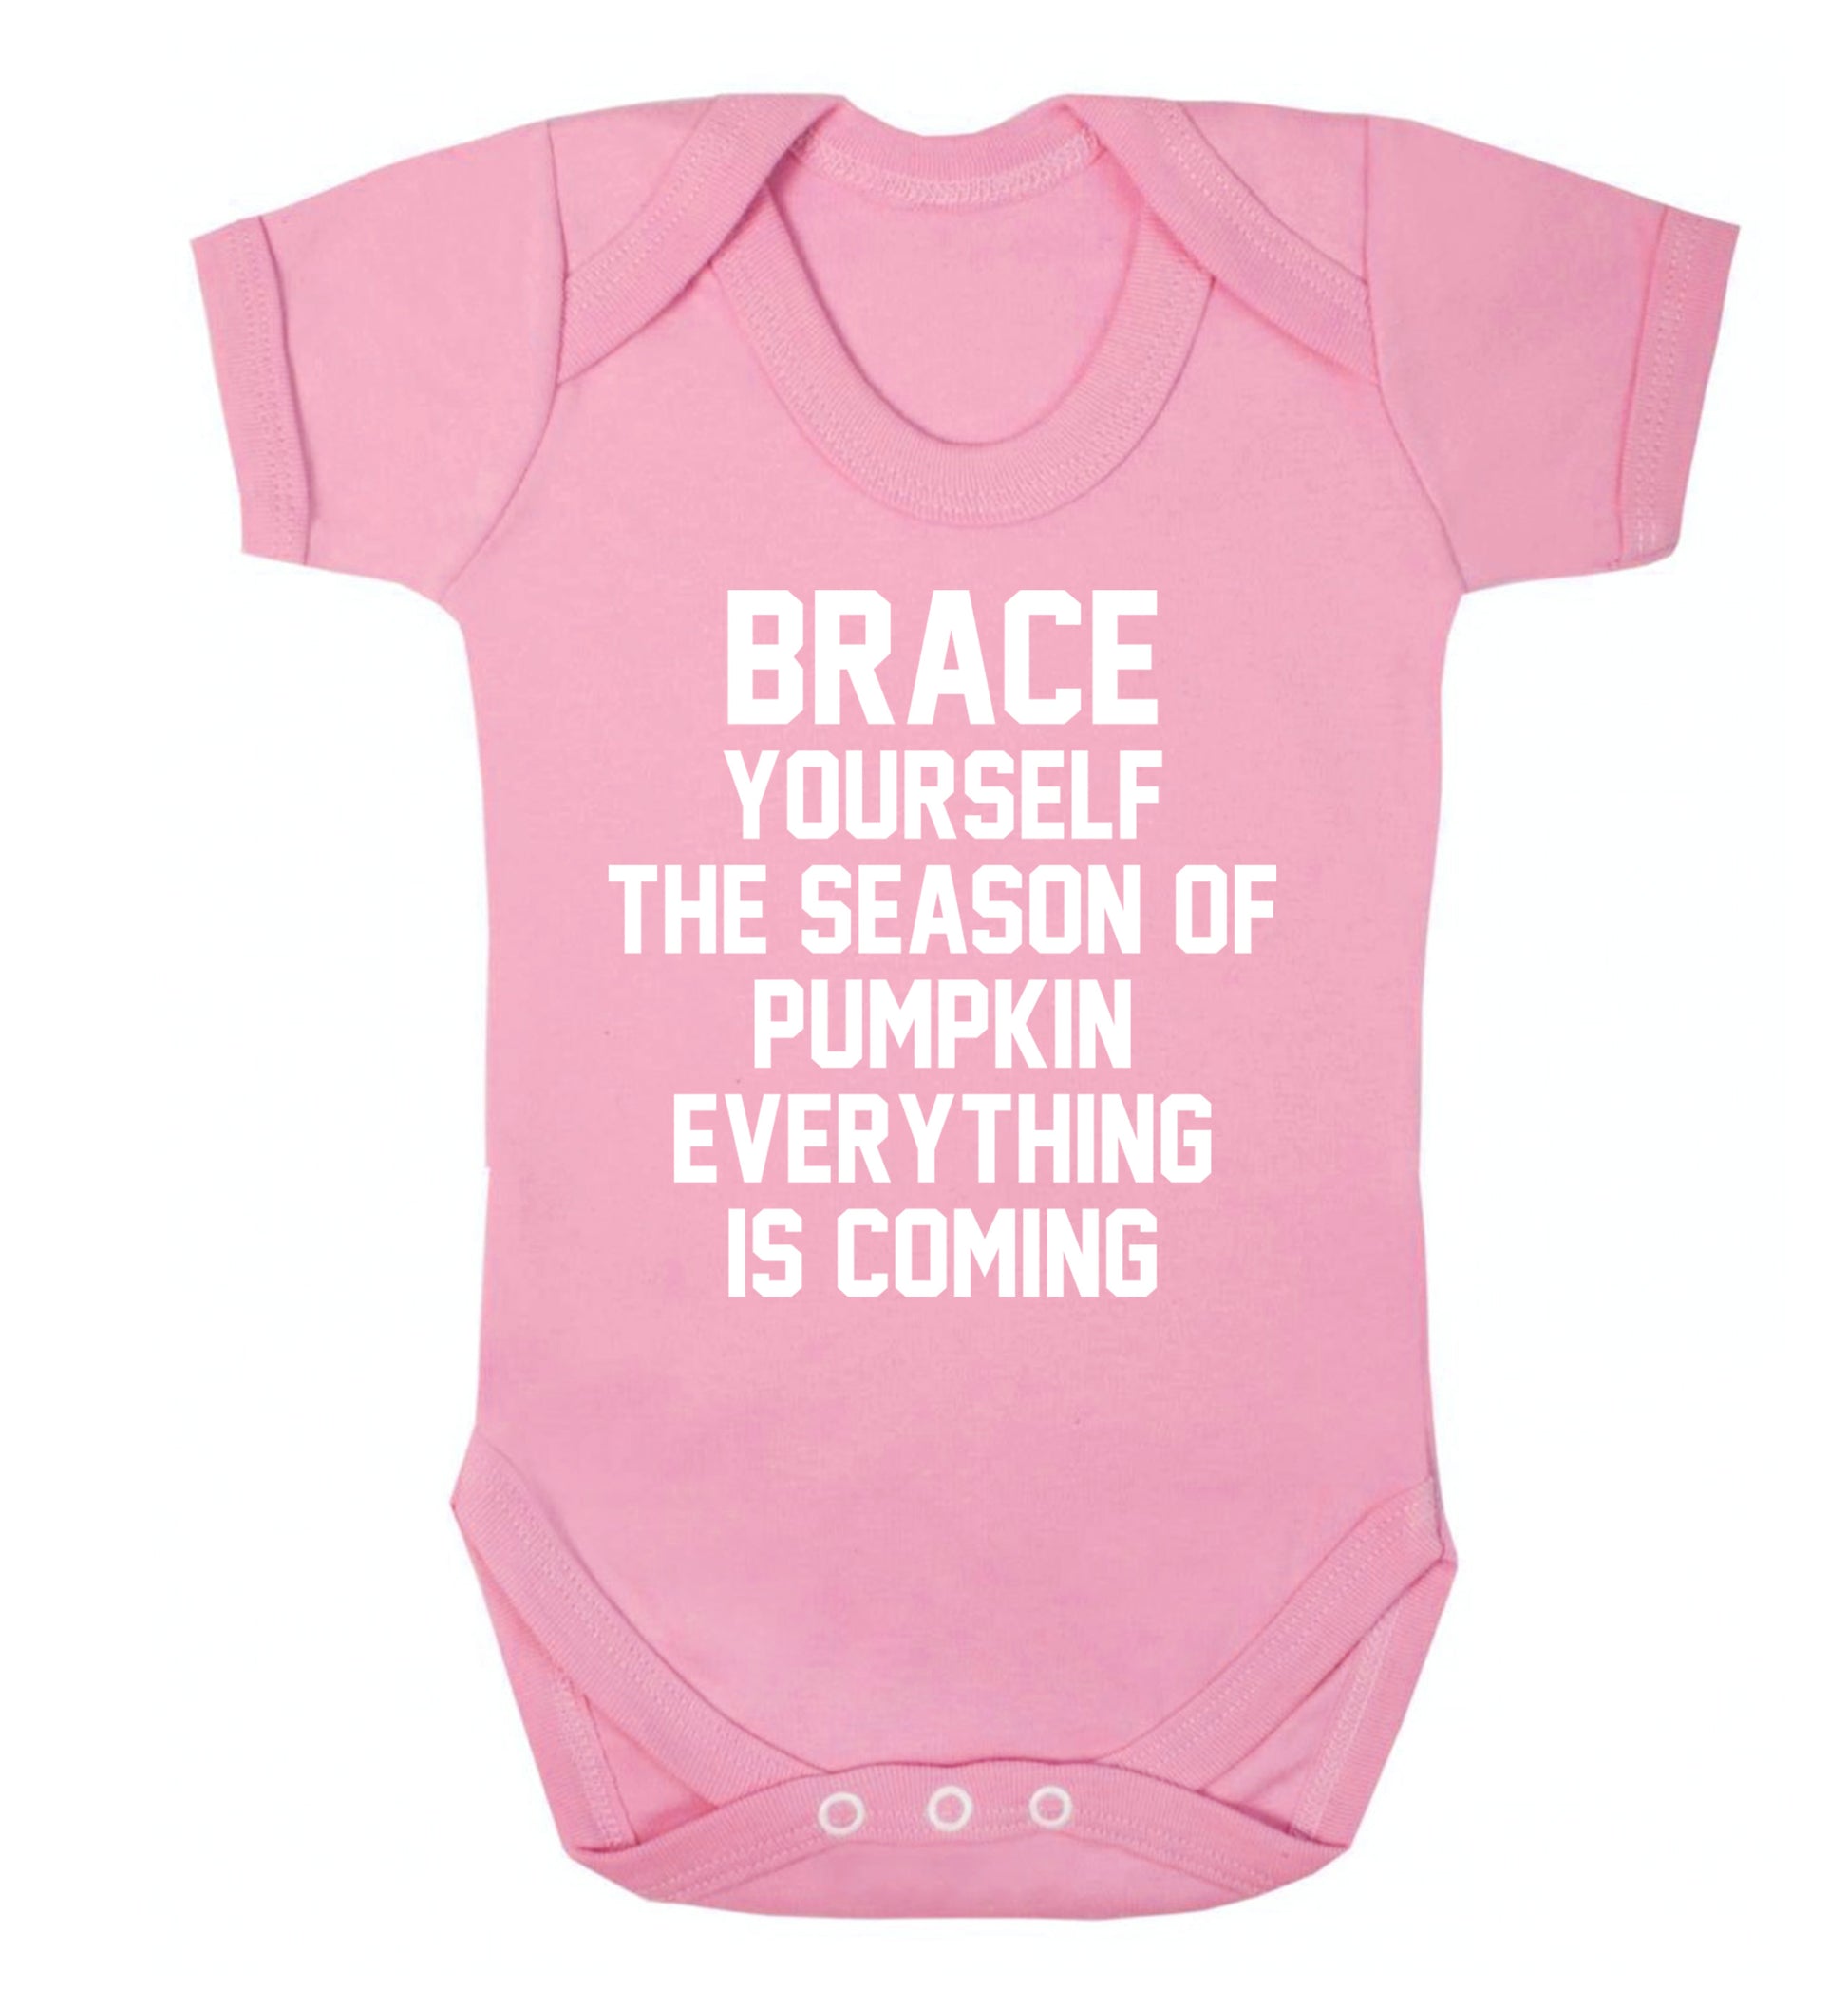 Brace yourself the season of pumpkin everything is coming Baby Vest pale pink 18-24 months